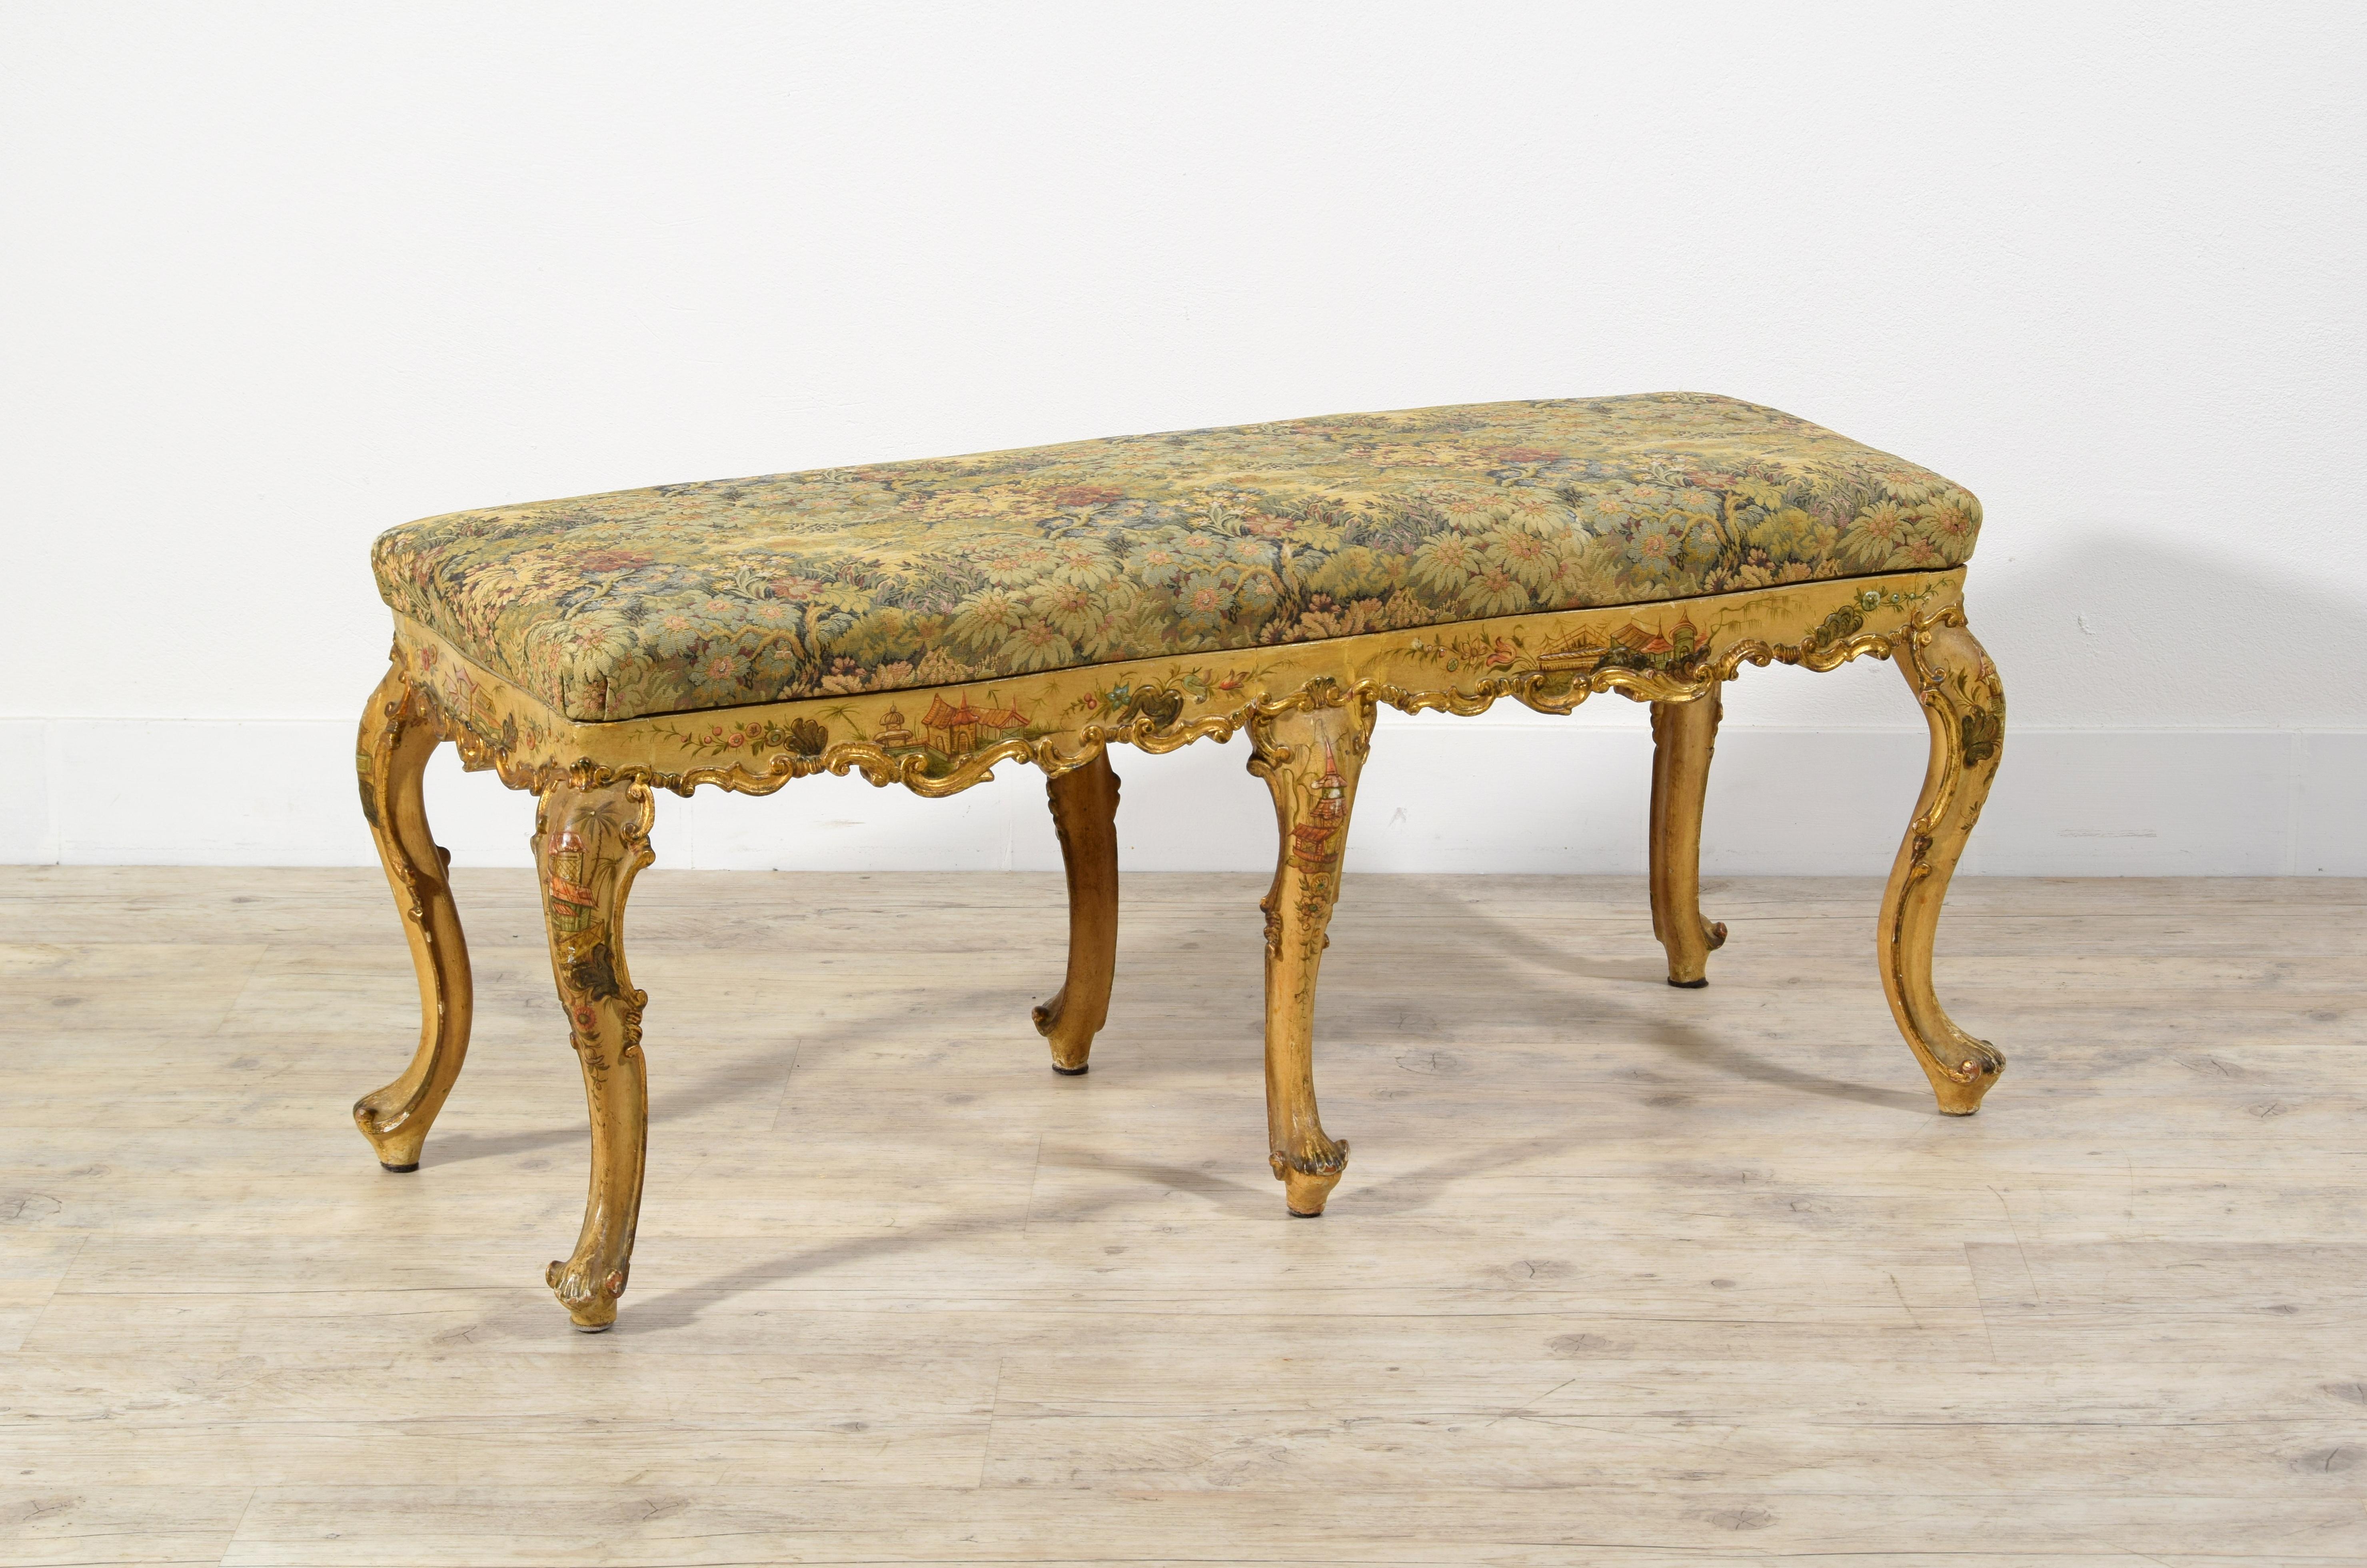 20th Century, Venetian Baroque Stile Carved and Laquered Giltwood Bench For Sale 3